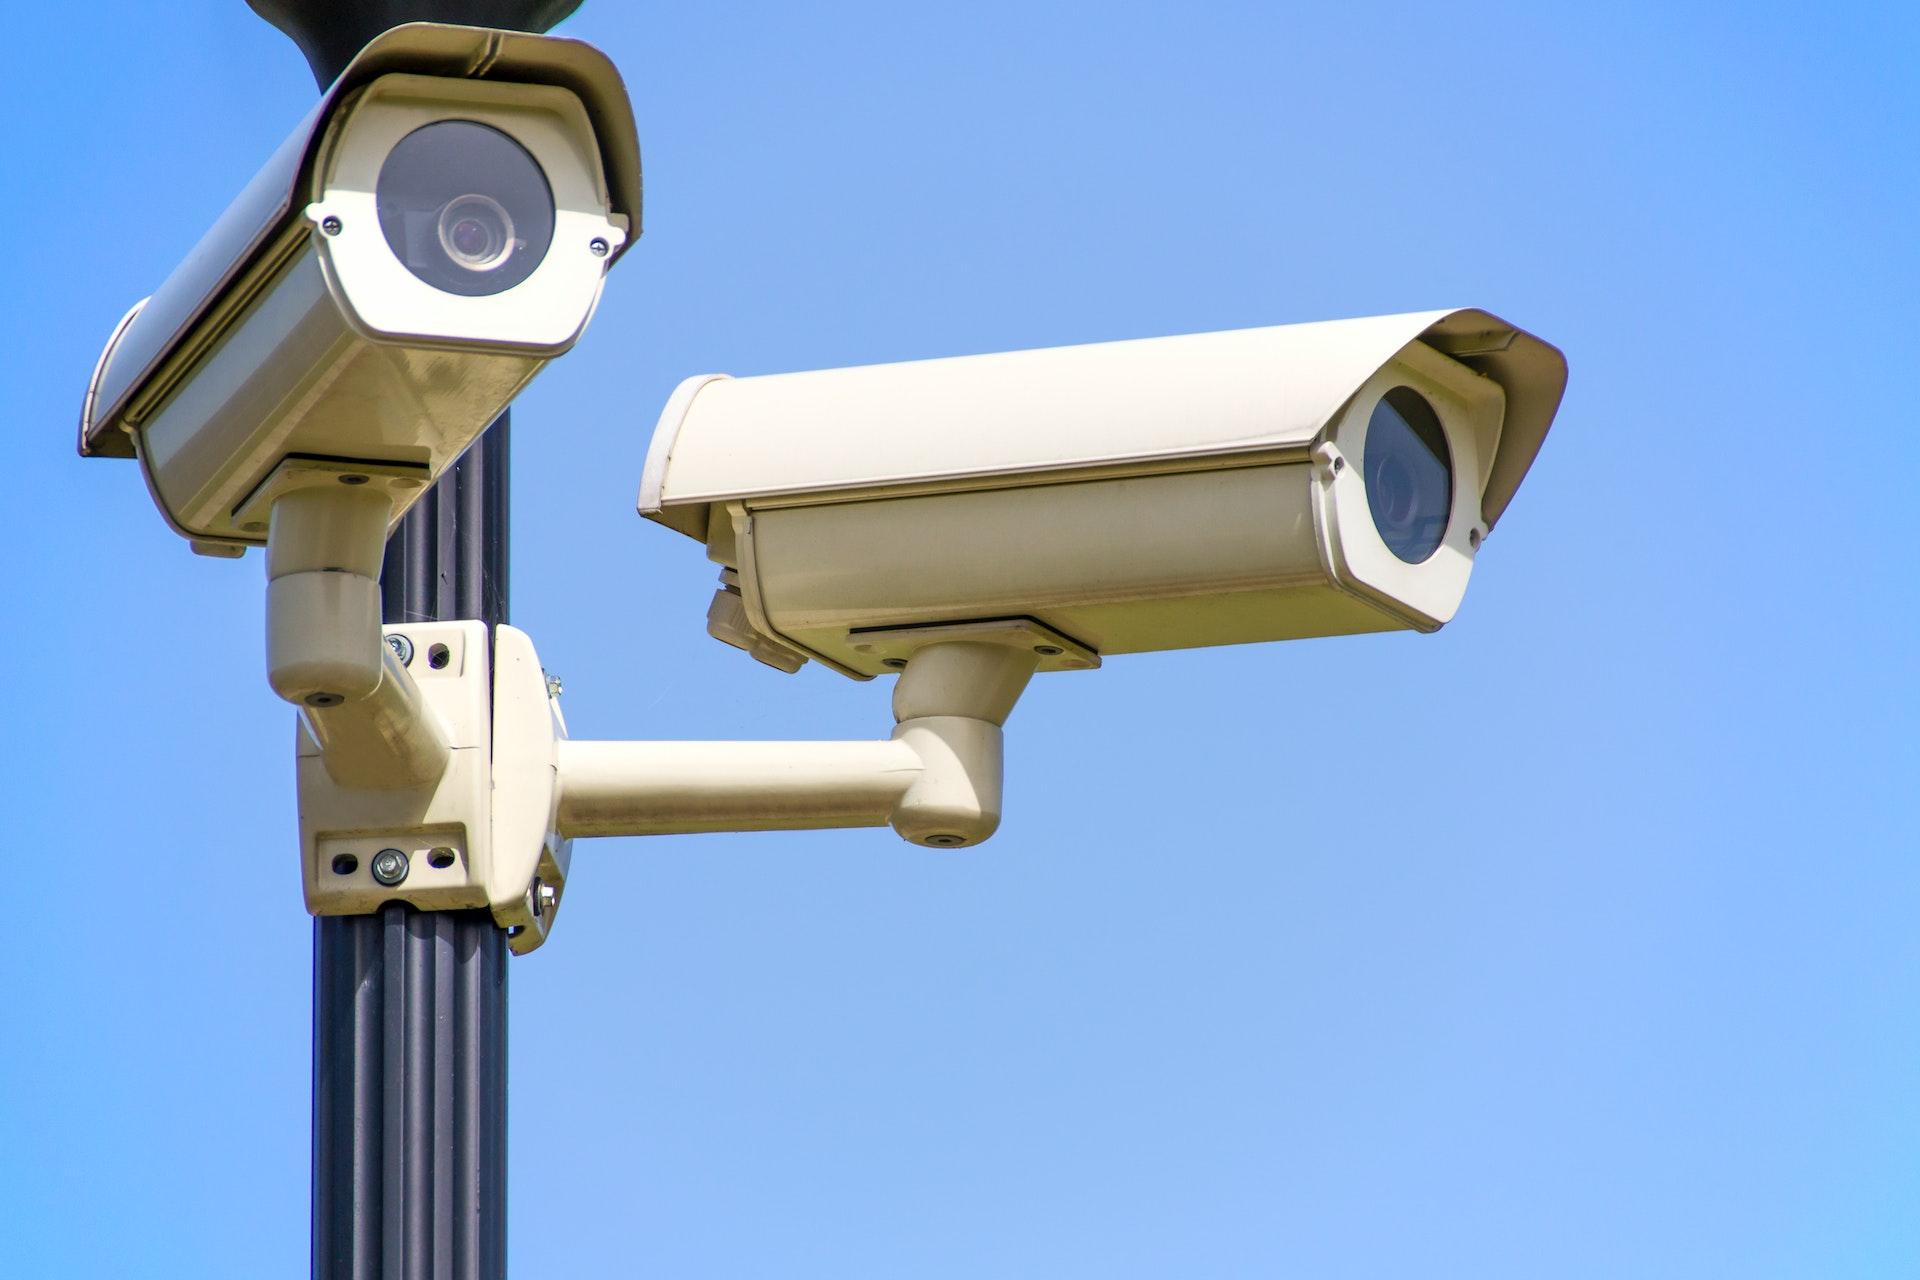 CCTV Cameras Can Be Installed To Minimise The Impact Of Terrorism On the Public.